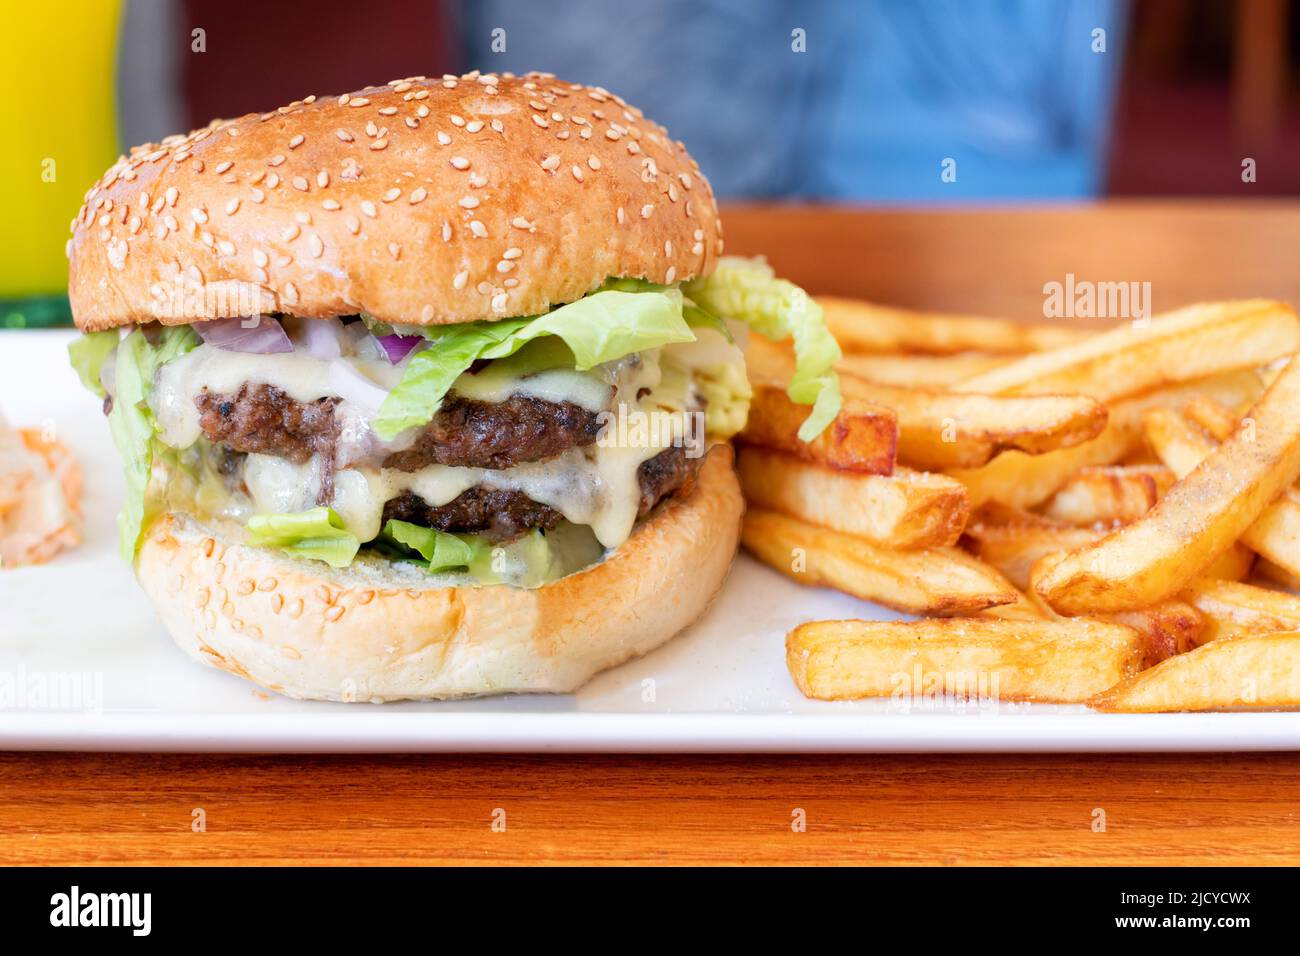 A Brewers Fayre Big stack Burger served in one of the chains uk restaurants with french fries. A tasty but high calorie meal option Stock Photo